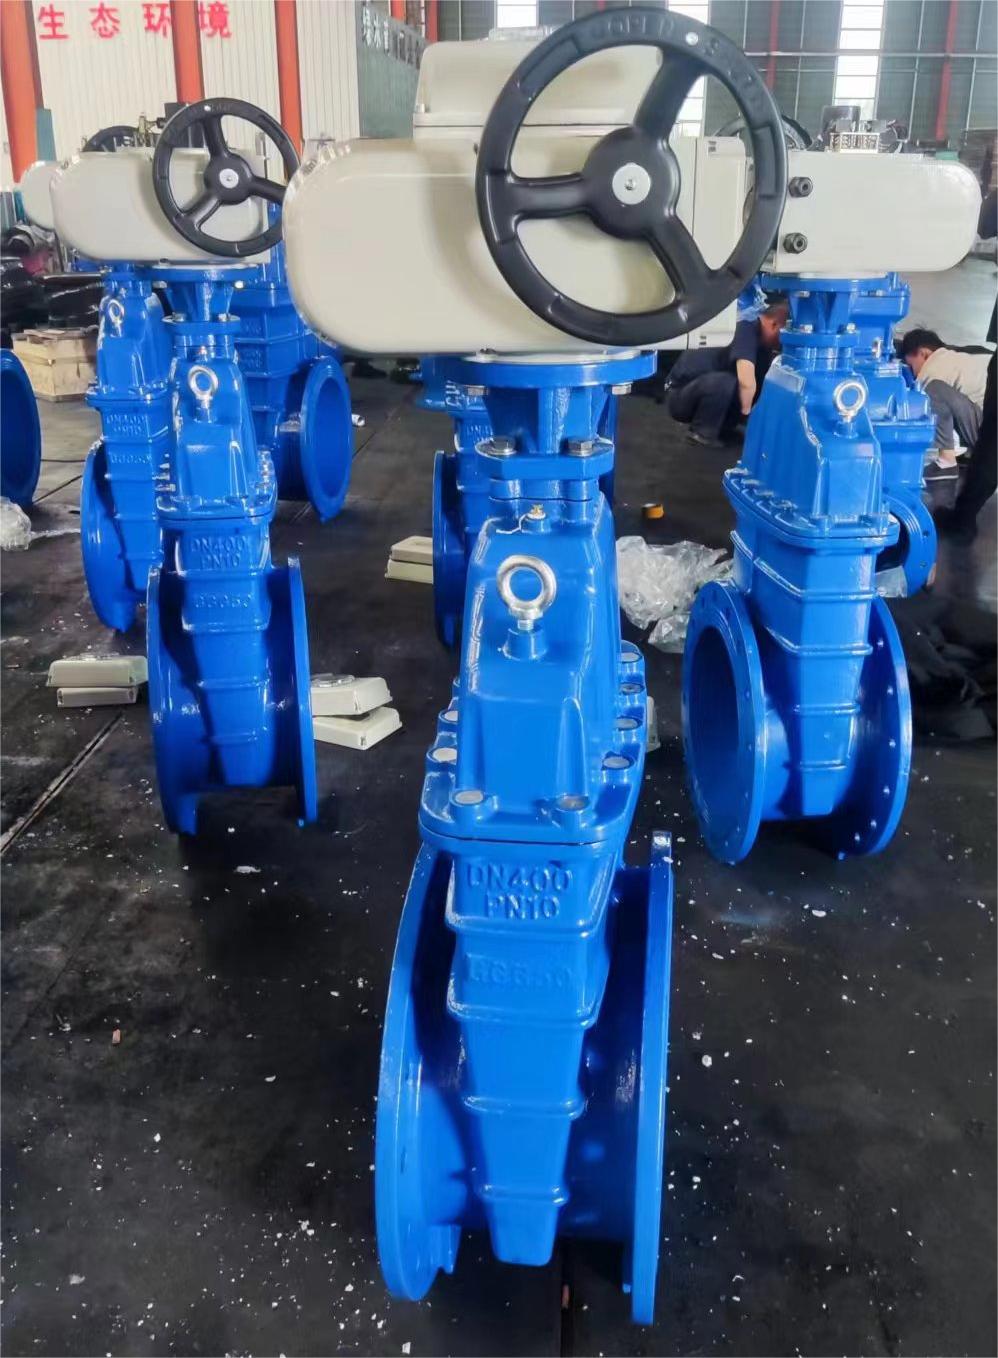 Electric Actuator Soft Seal Gate Valve: A Reliable Solution for Efficient Control Systems